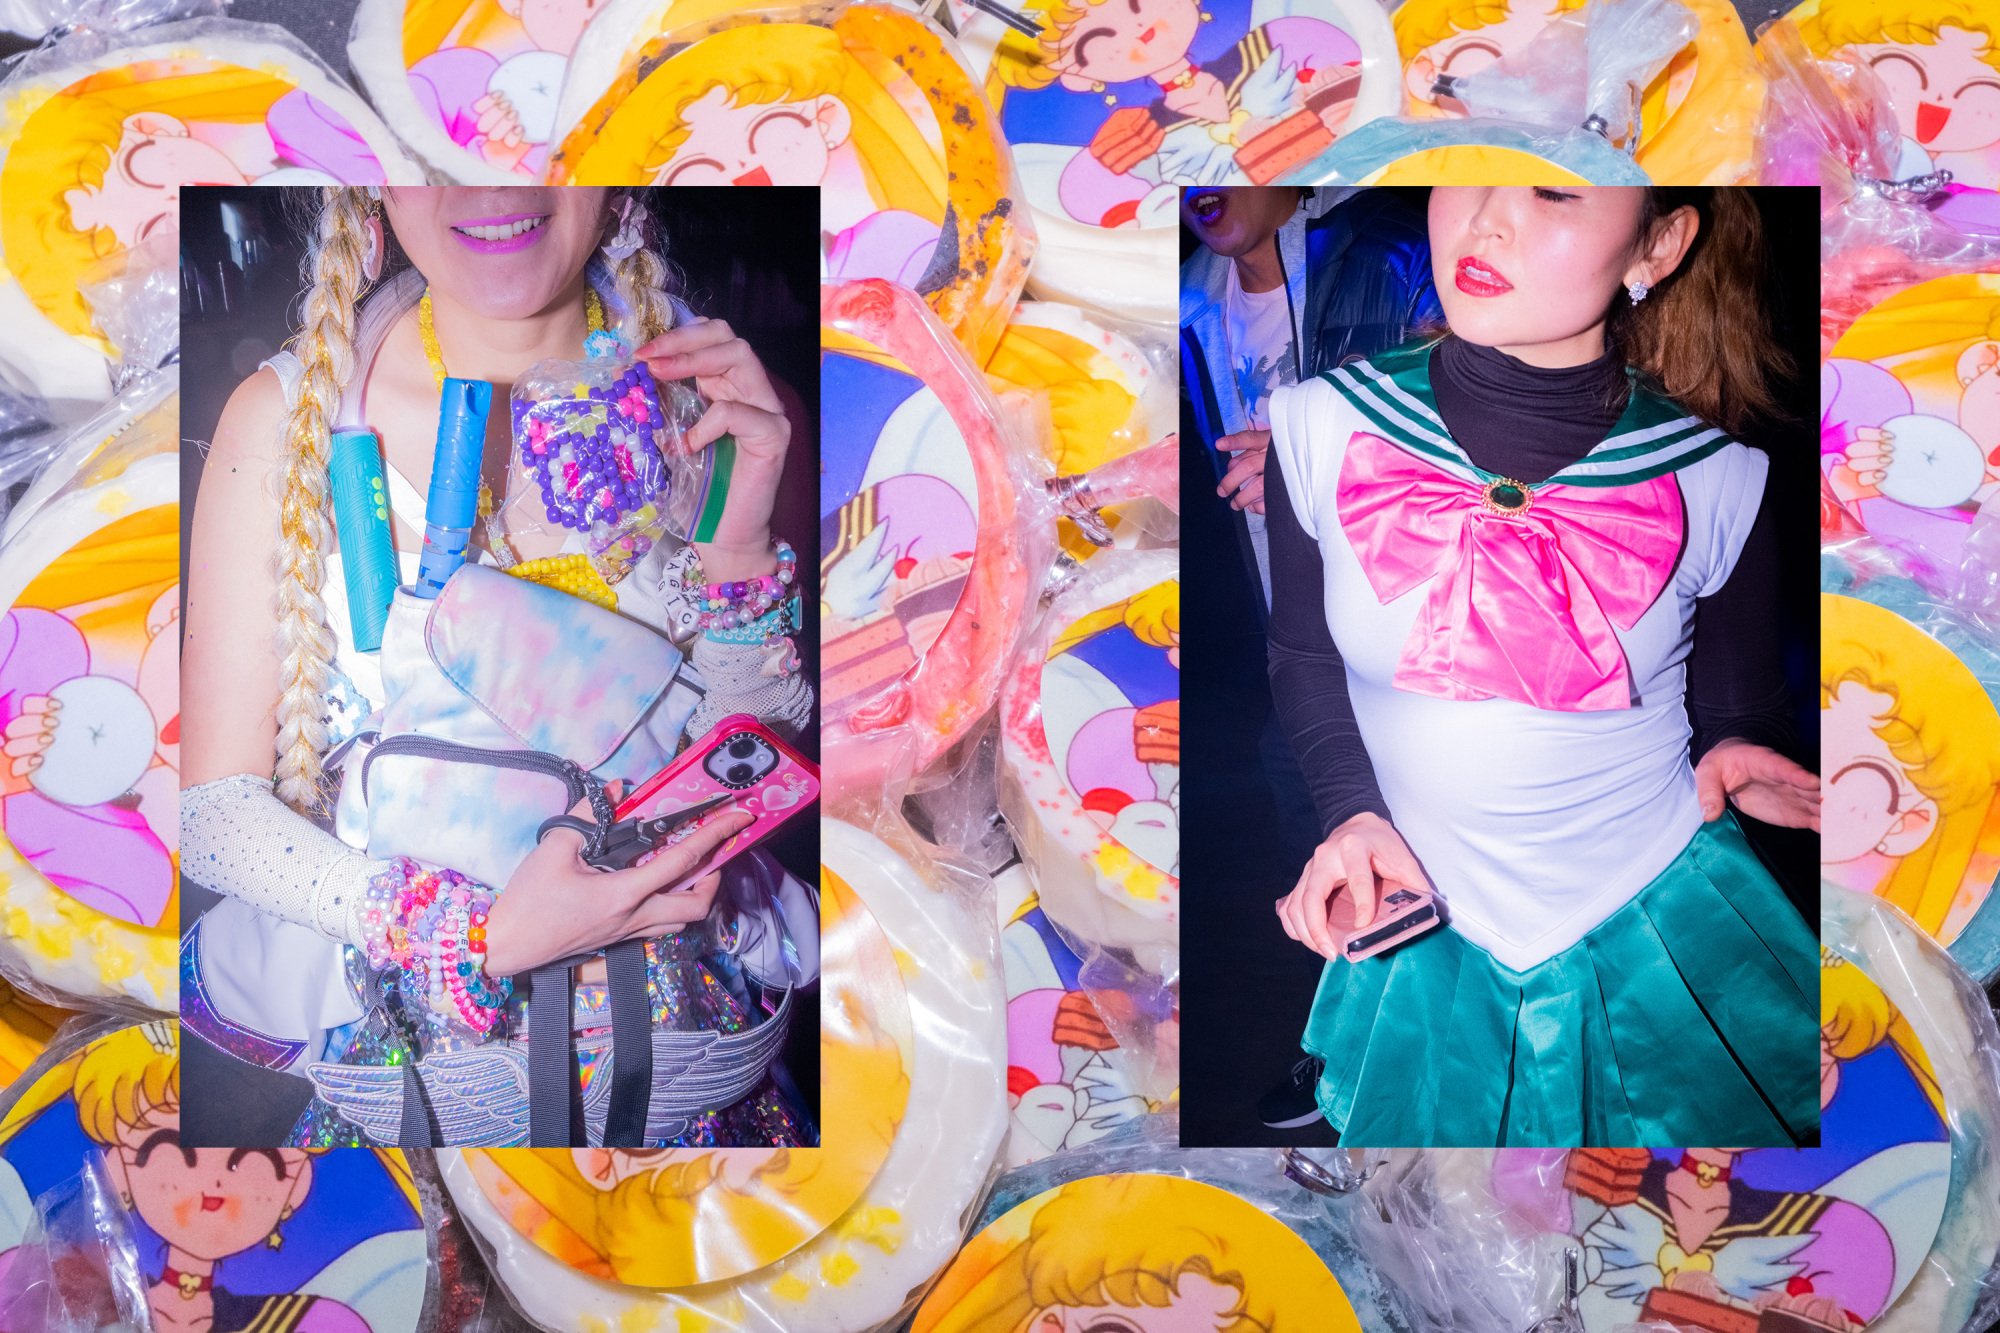 Collage of sailor moon cookies, costume, and rave accessories